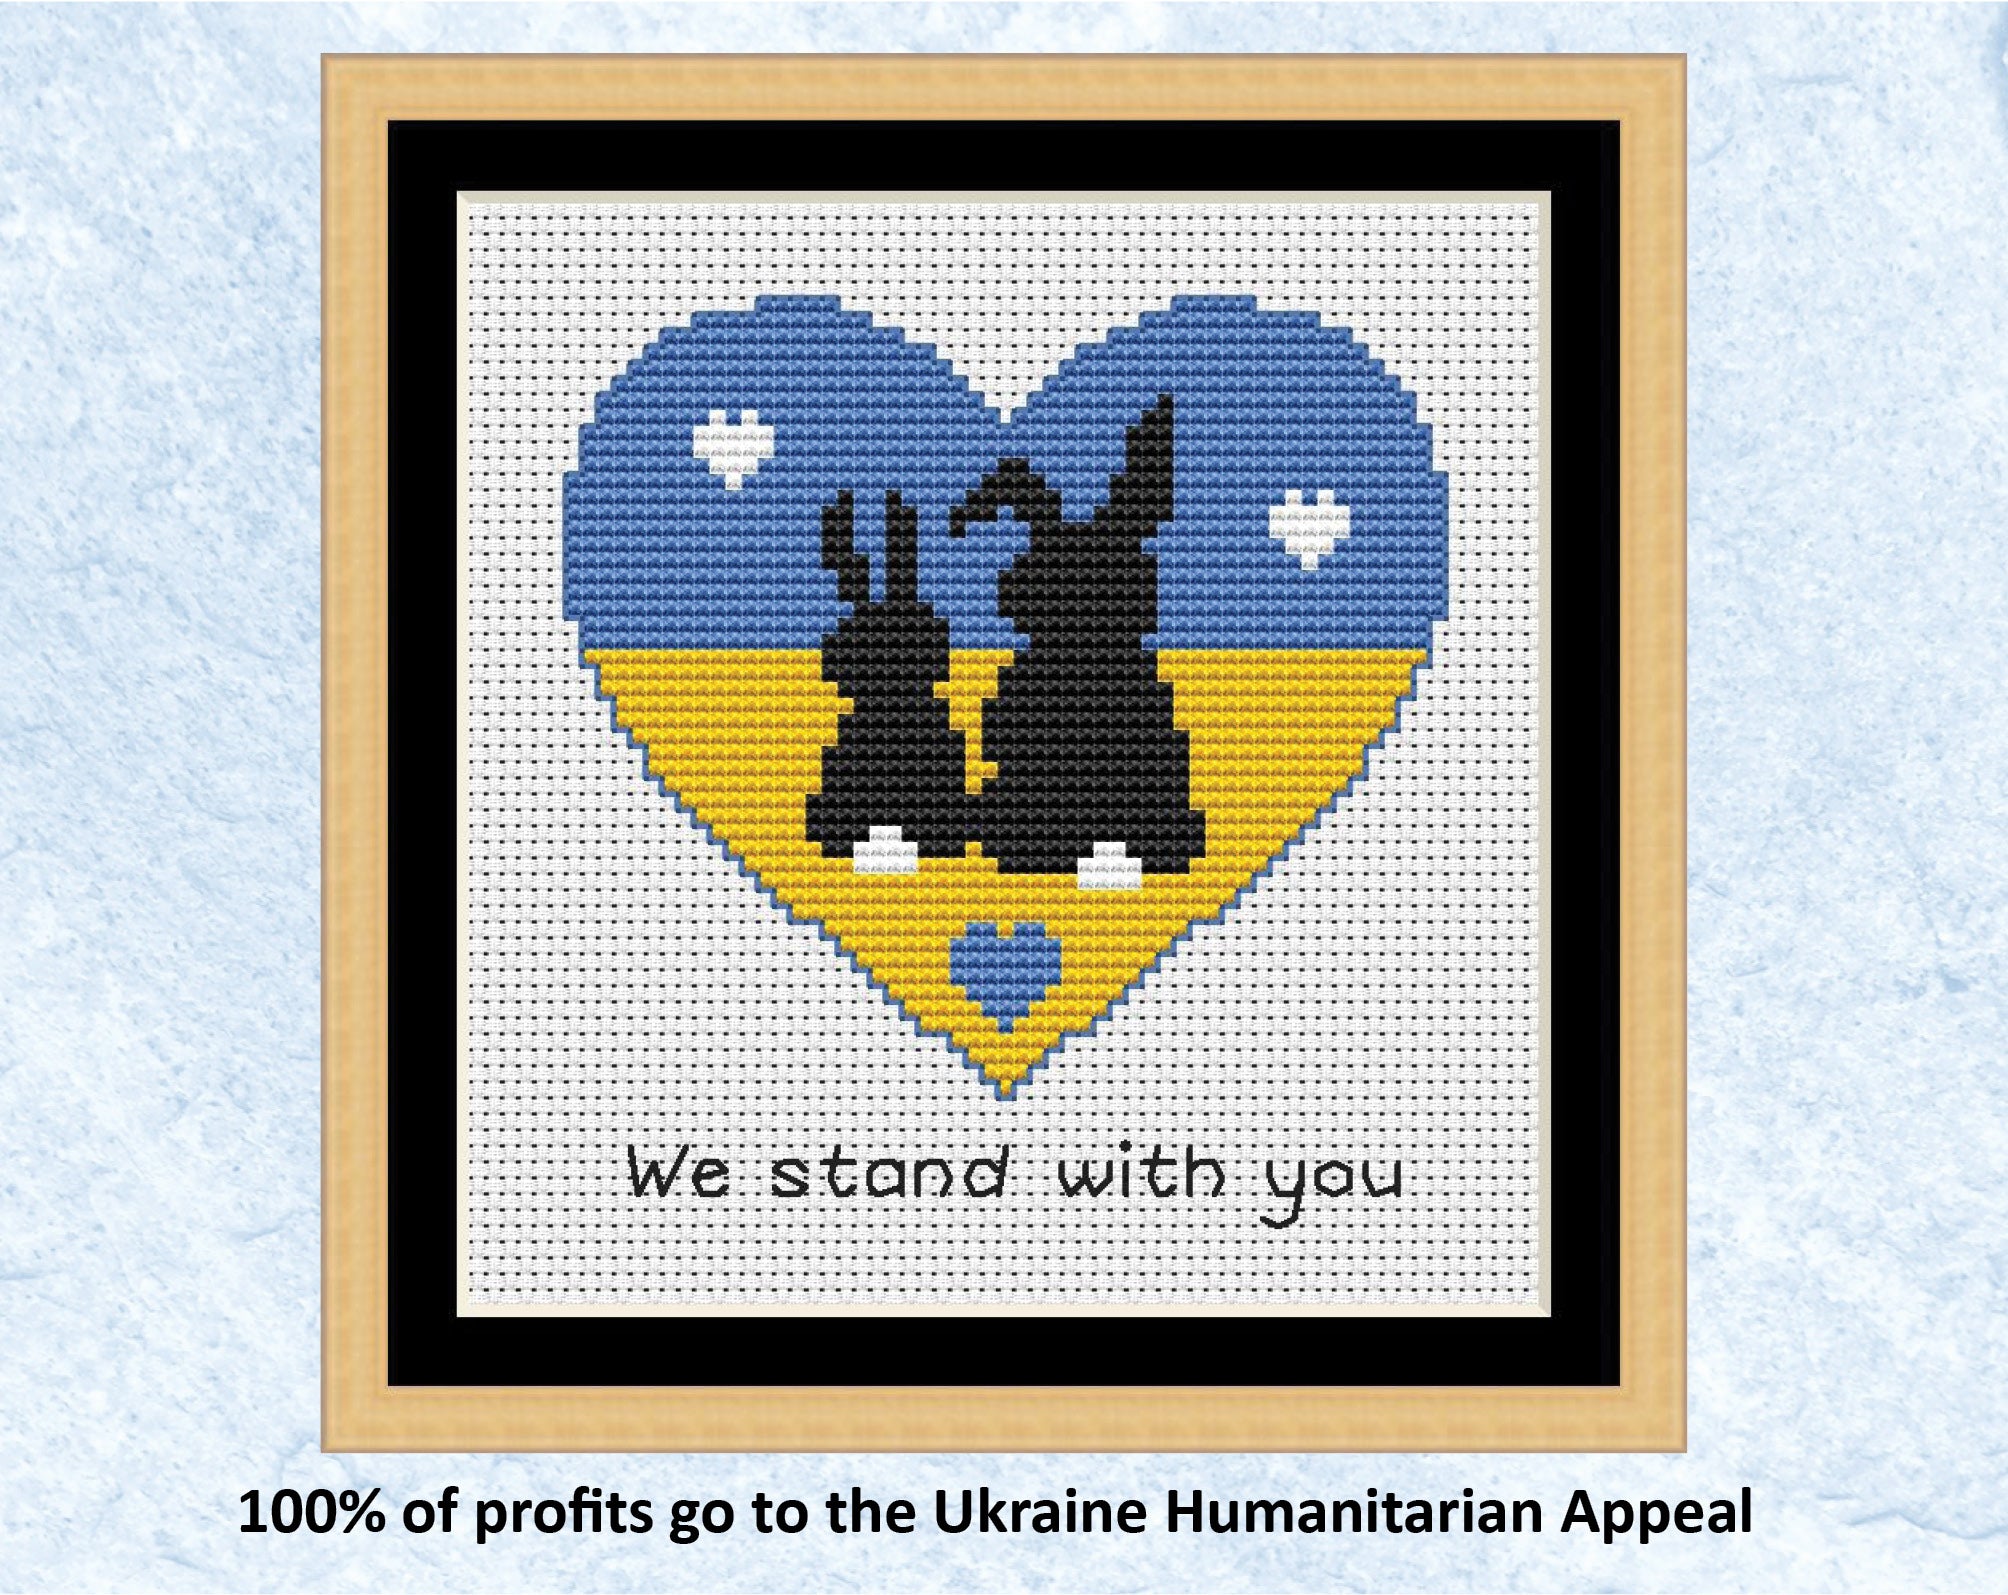 "We Stand With You" cross stitch pattern of two bunnie silhouettes in a heart shape filled with the colours of the Ukrainian flag. 100% of profits go to the Ukraine Humanitarian Appeal. Shown with frame.